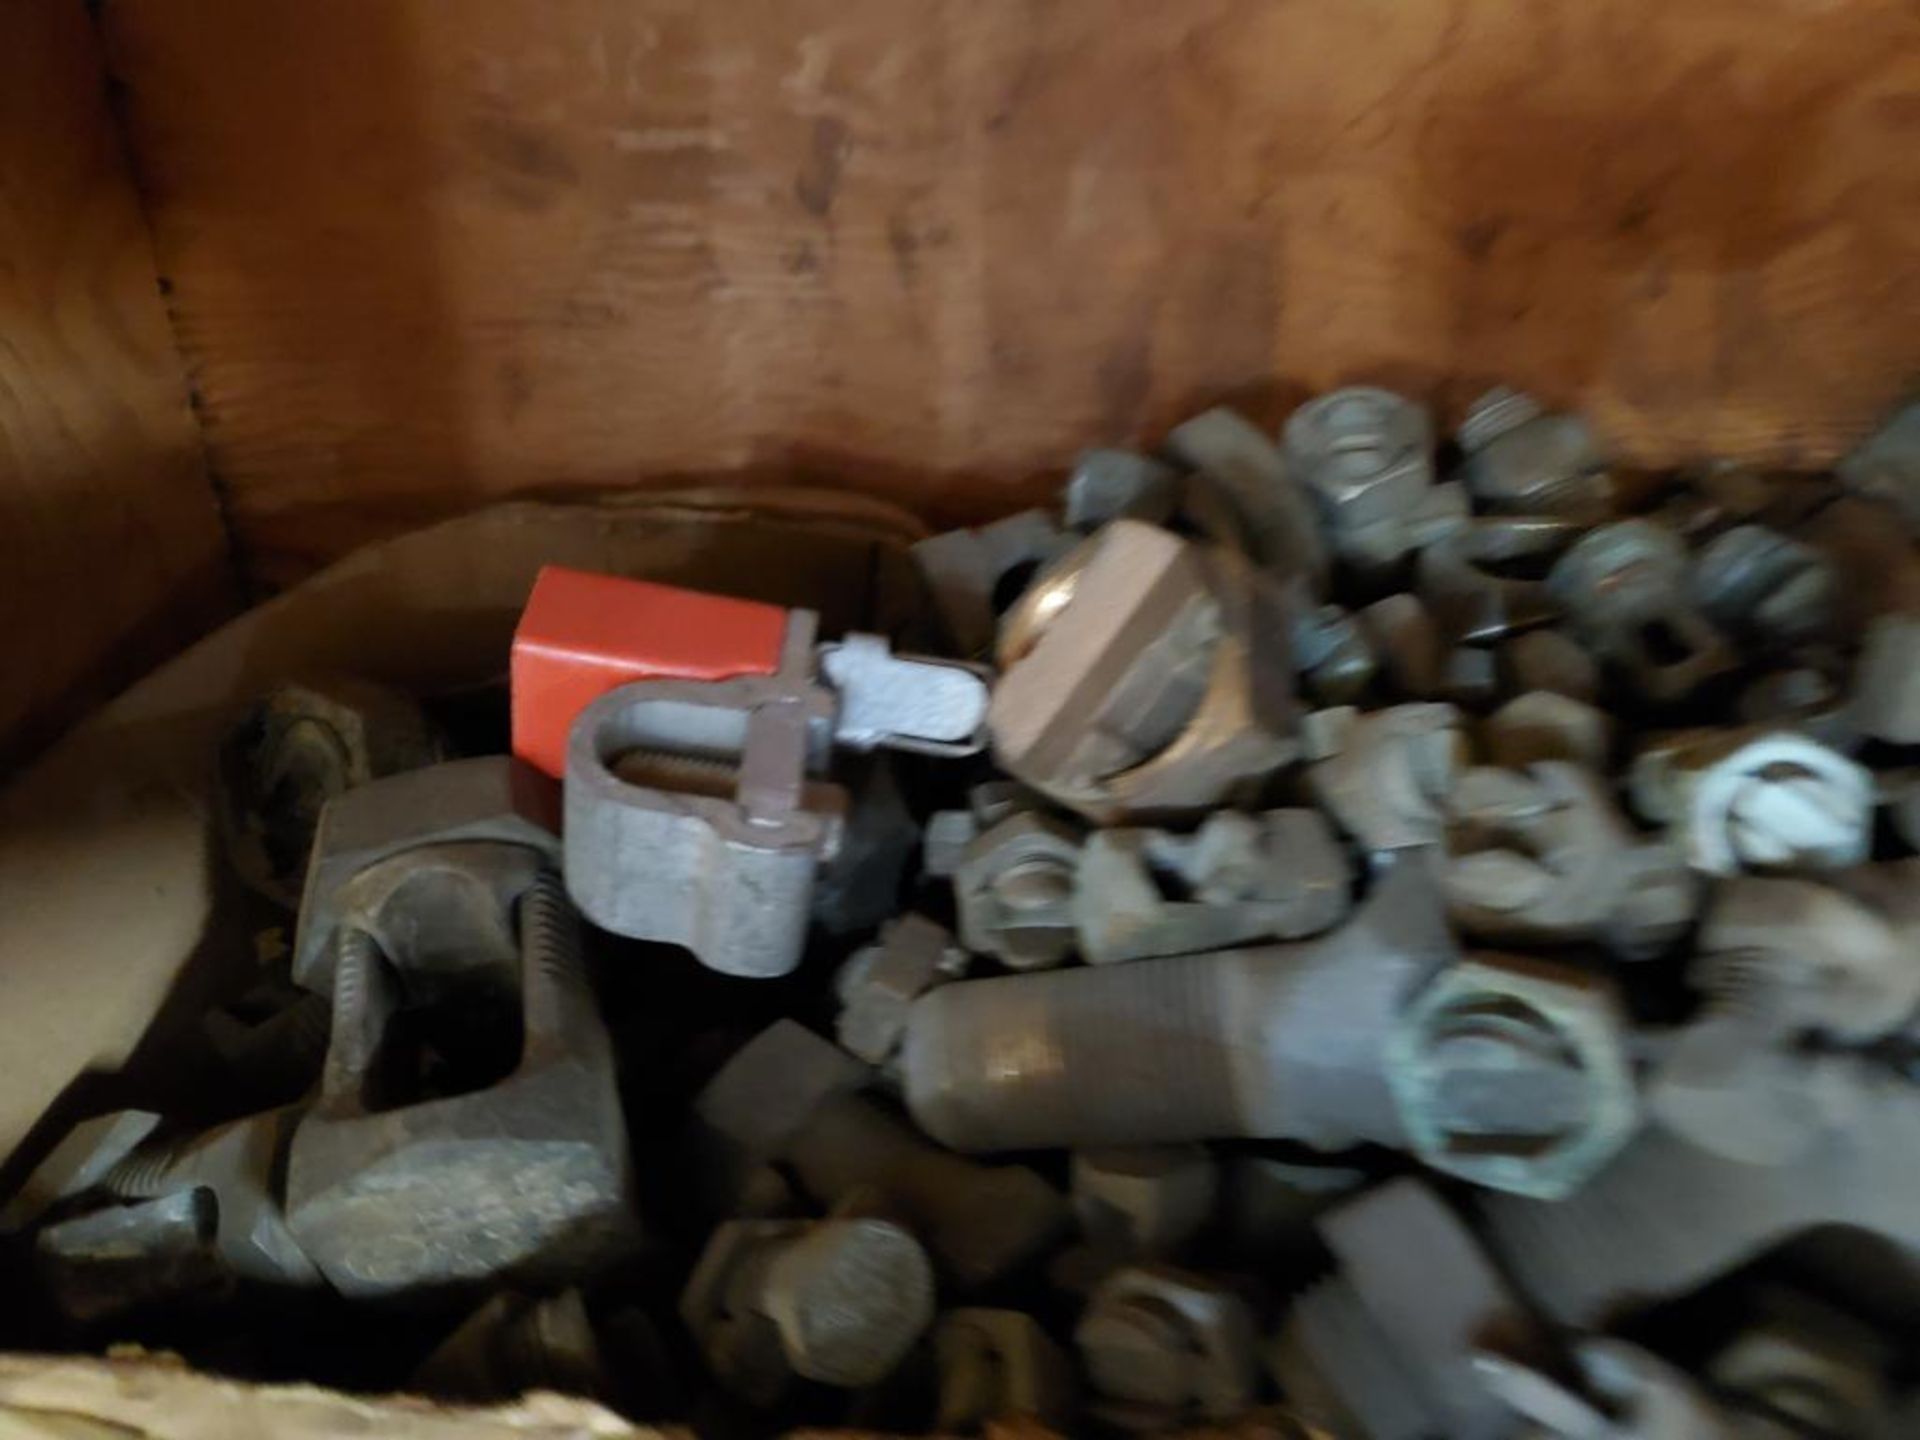 Contents of one shelf cubby - Large assortment of electrical lugs, fittings, and connectors. - Image 2 of 6